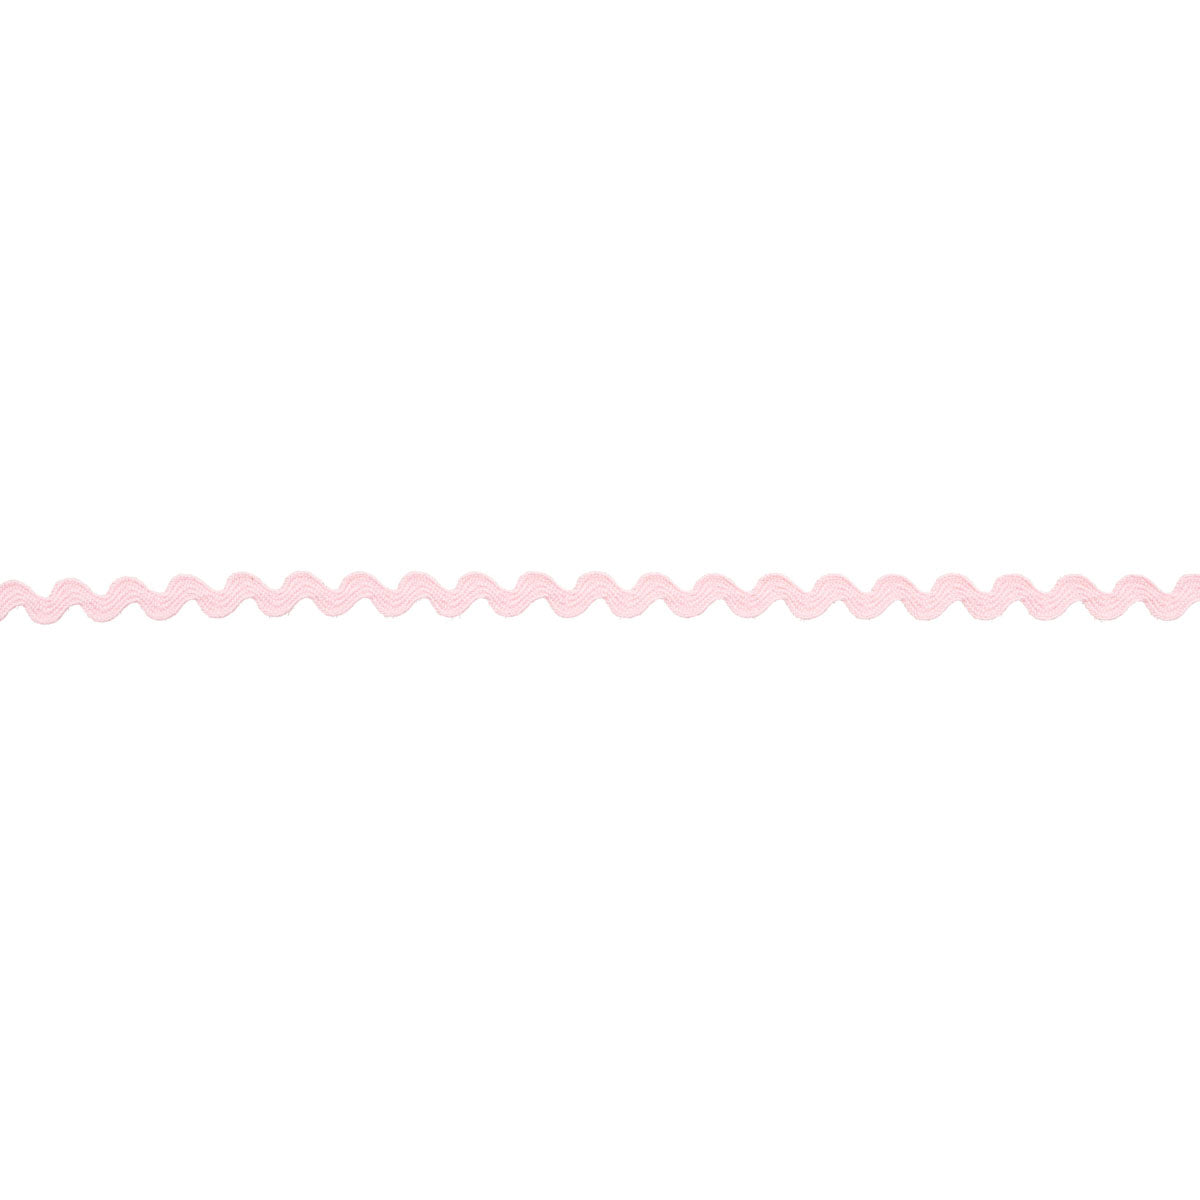 RIC RAC TAPE SMALL | PALE PINK